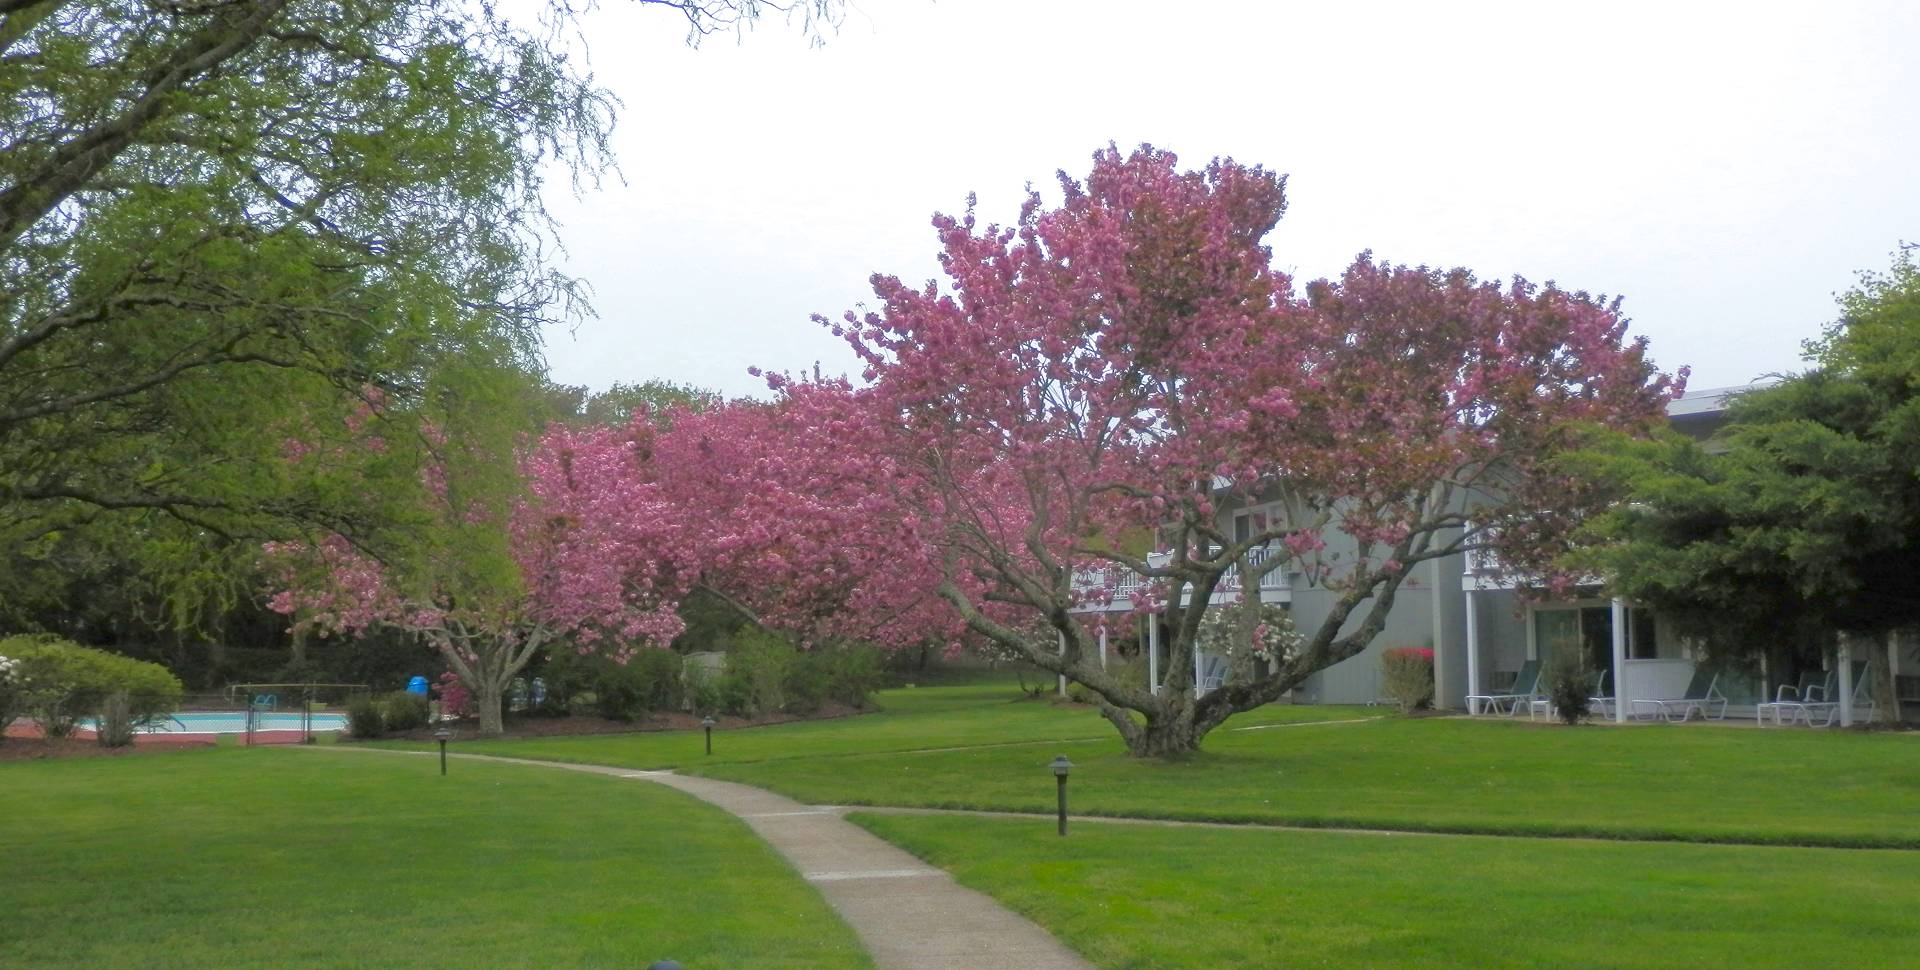 Beautiful grounds of the East Hampton House with magnificent Cherry trees in bloom.